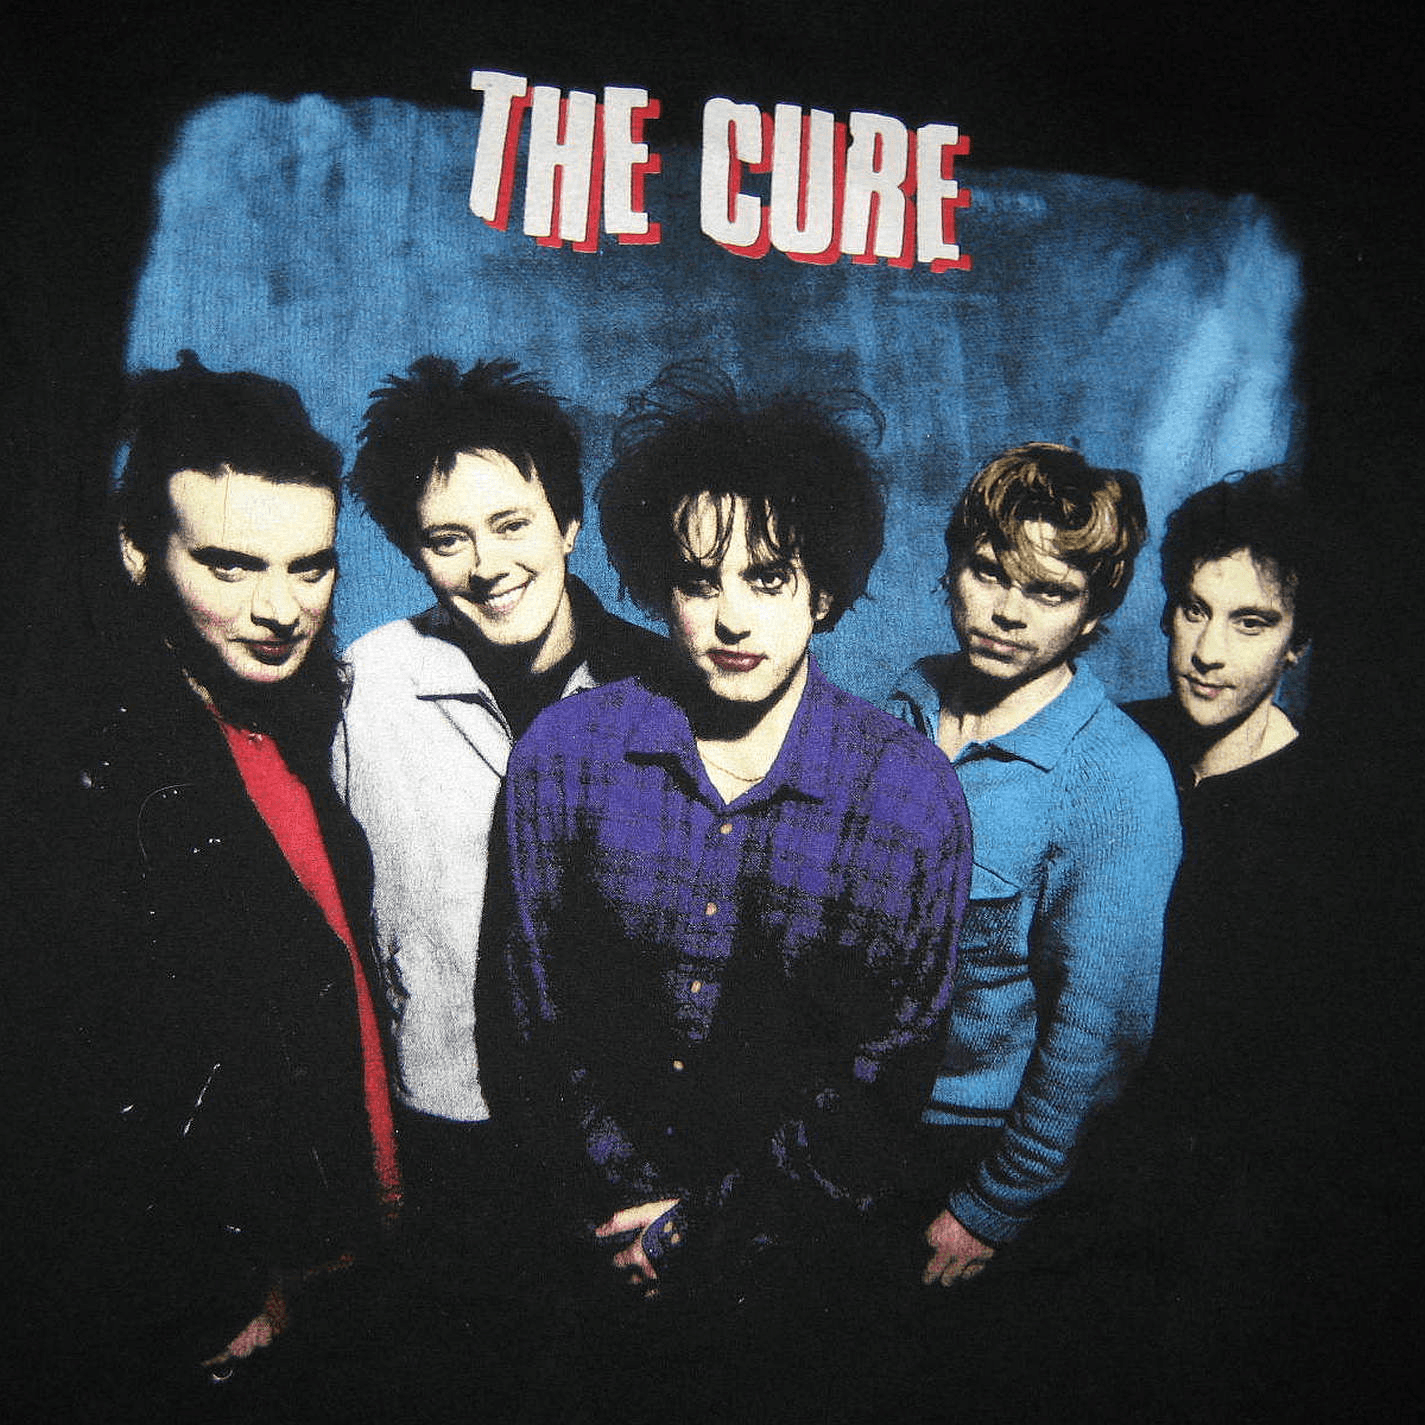 The Cure Wallpapers - Wallpaper Cave